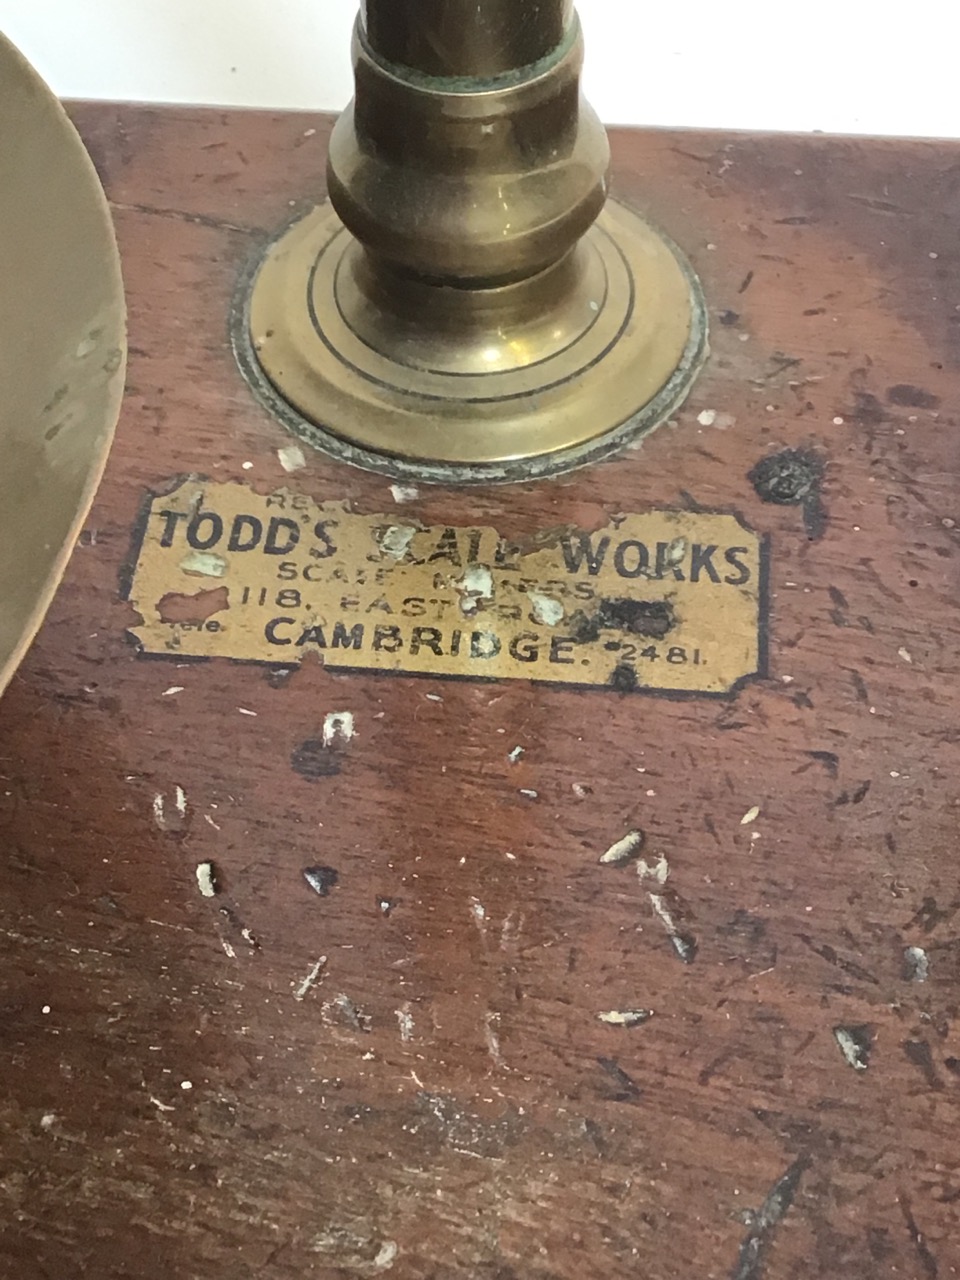 A set of brass post office scales. With original Toddâ€™s scale works label. H:43cm - Image 2 of 6